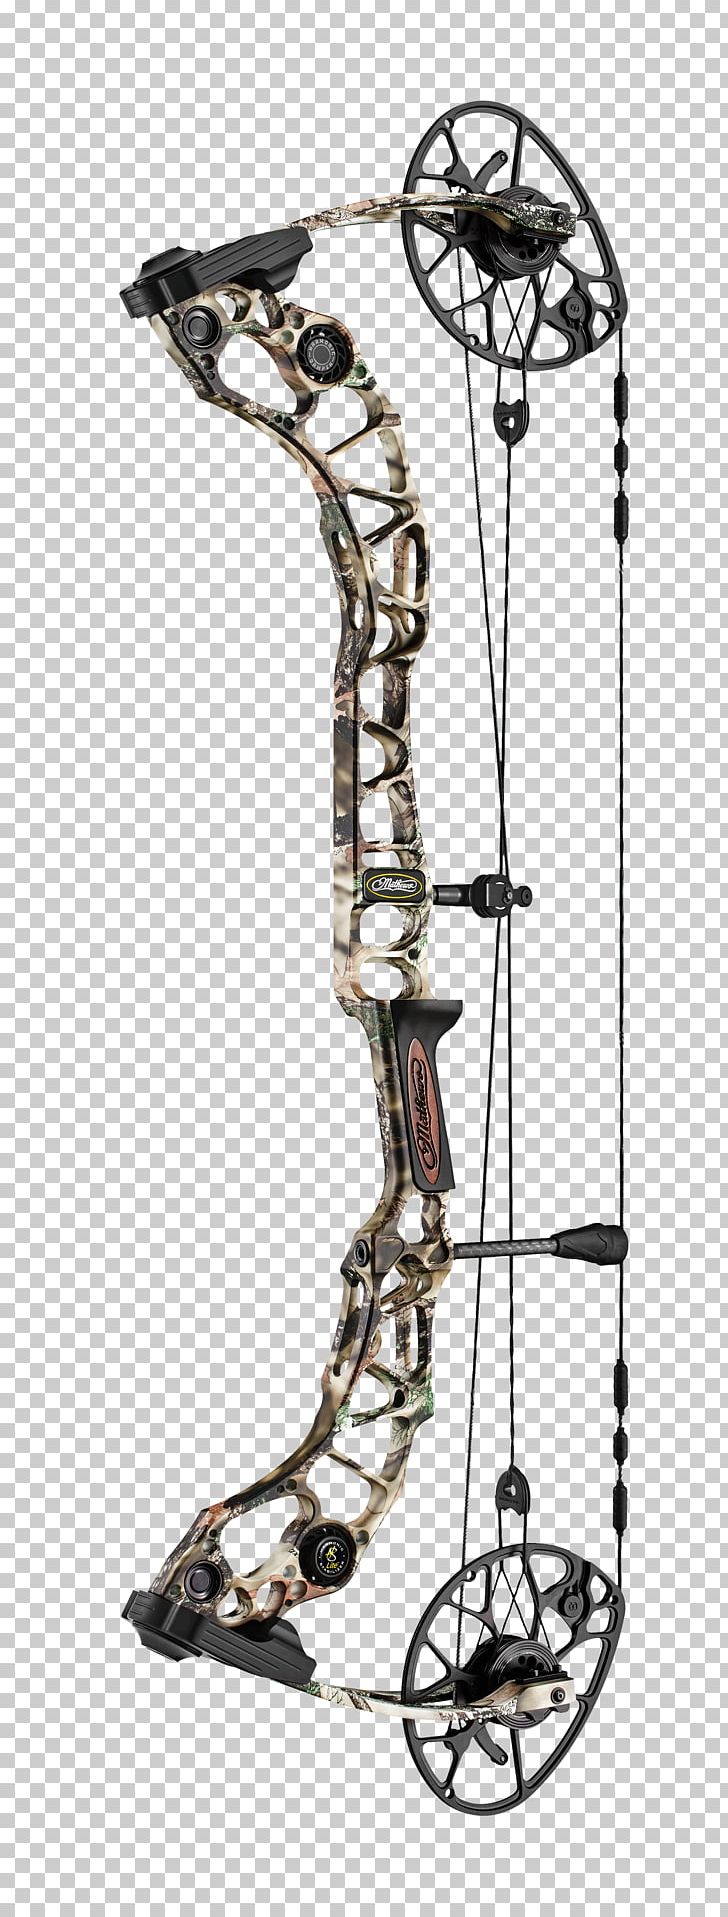 Compound Bows Bow And Arrow Archery Hunting Cam PNG, Clipart, 5 Cm, Abbey Archery Pty Ltd, Advanced Archery, Archery, Borkholder Archery Free PNG Download